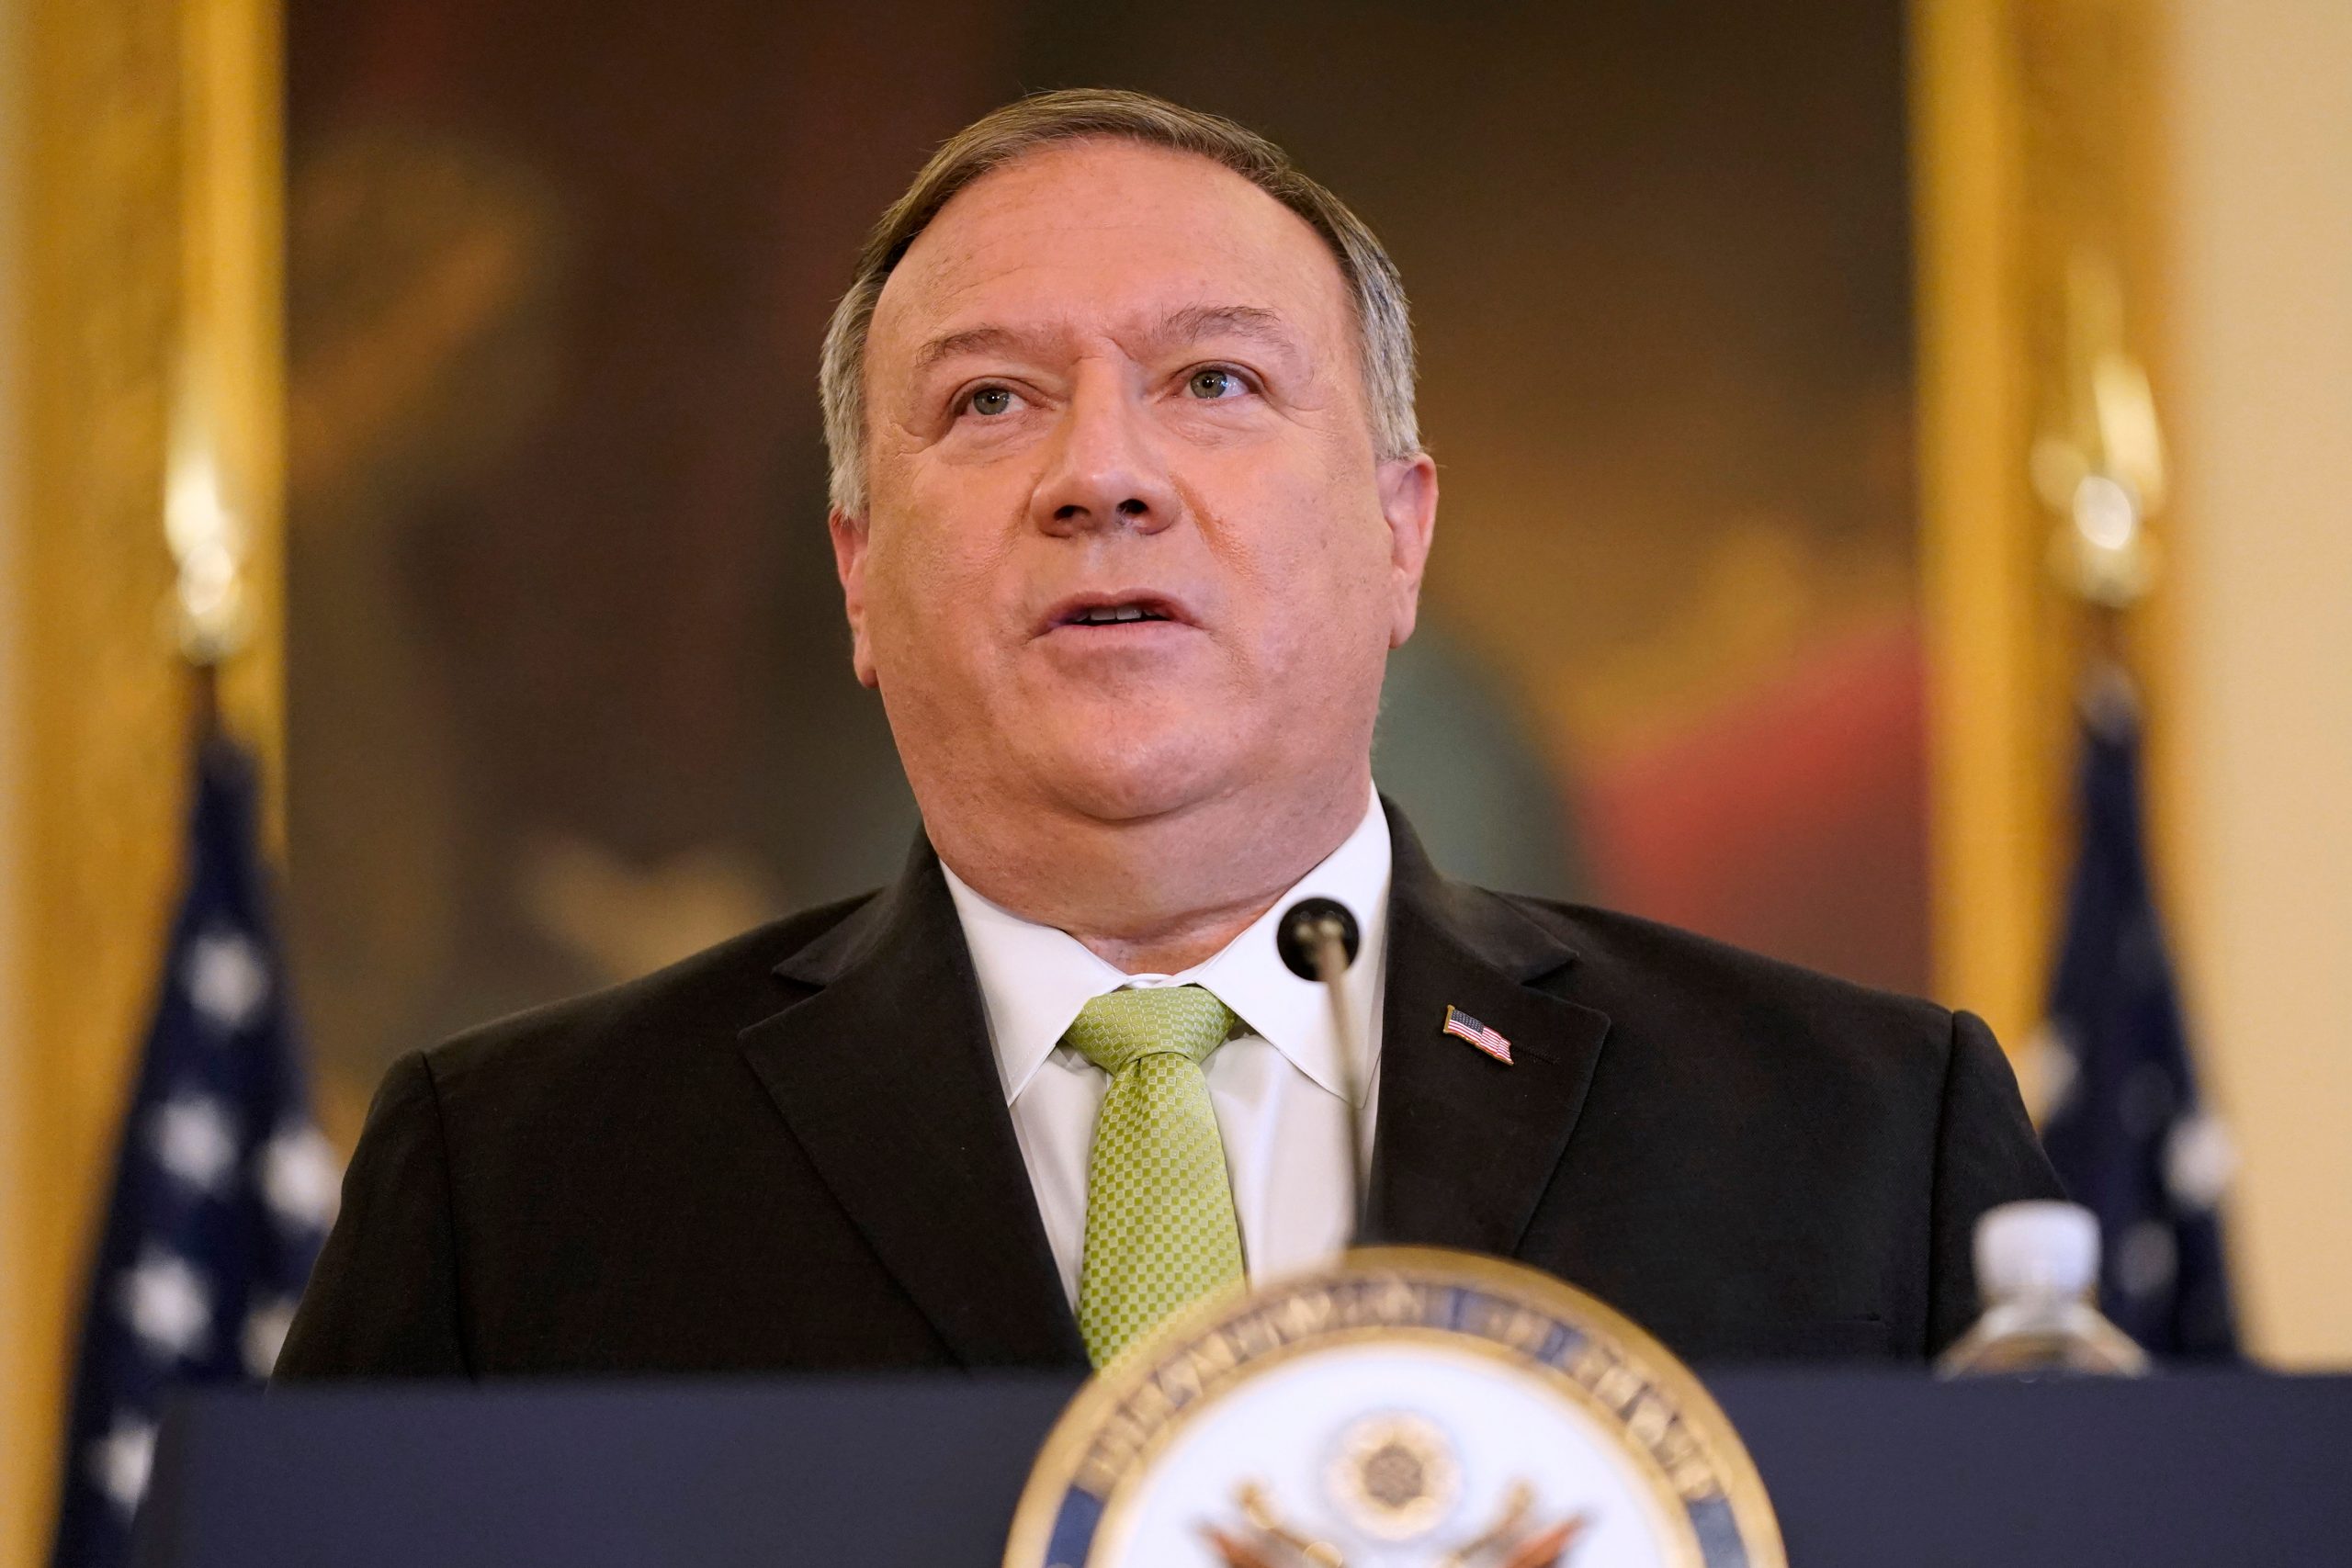 Mike Pompeo under quarantine after exposure to COVID-19